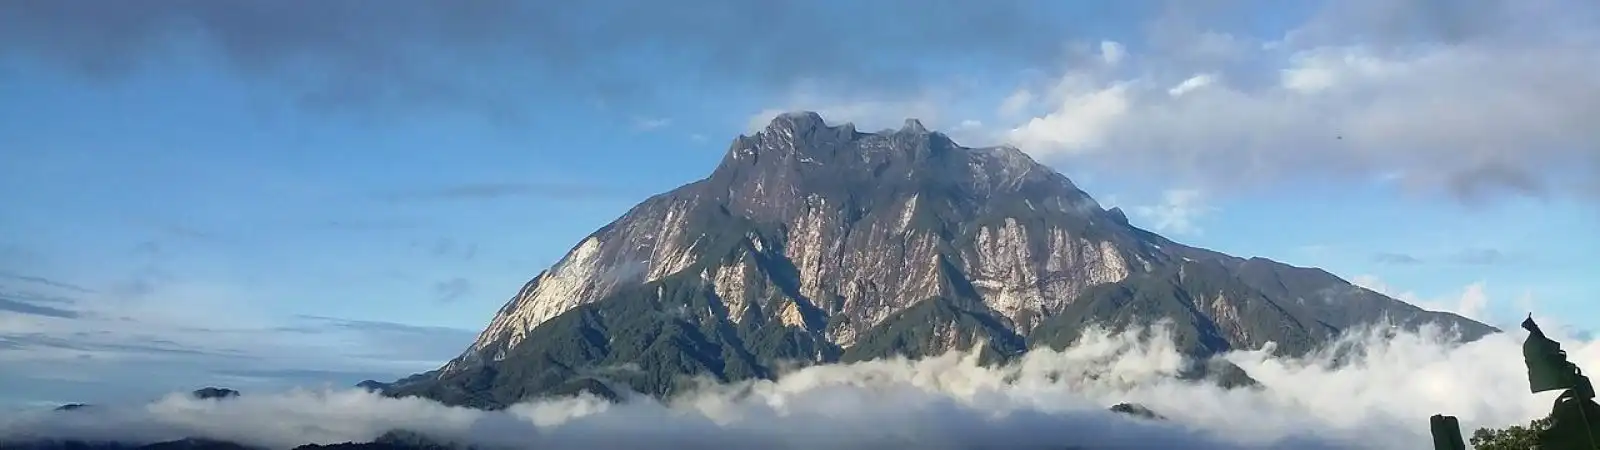 5 Amazing Mountains in Asia to Climb in 2020 post image